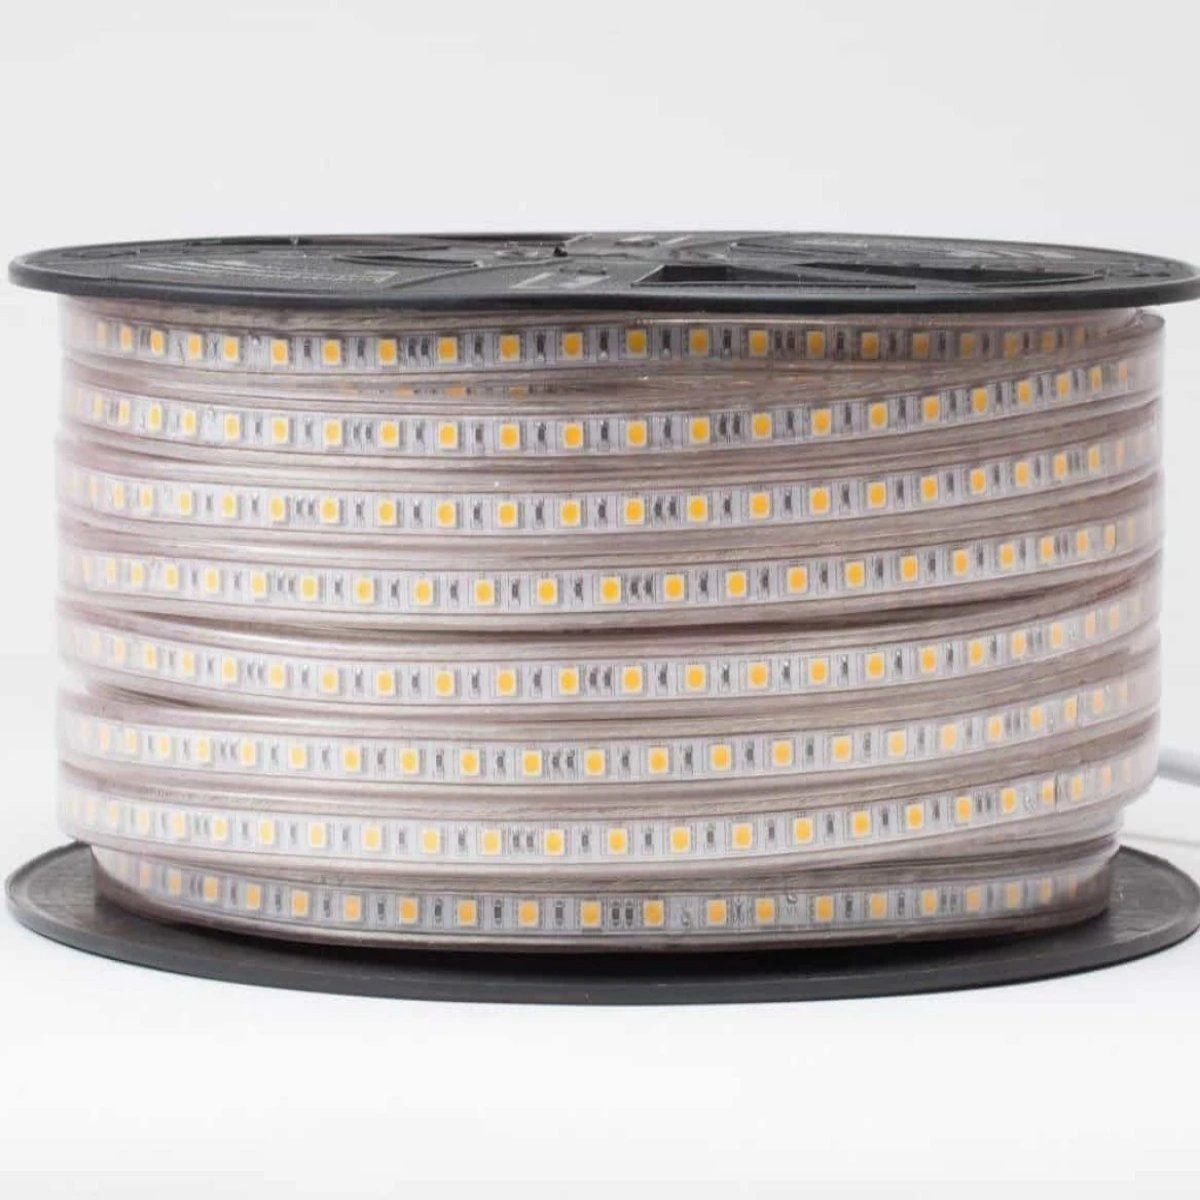 led strip light with visible yellow led chips wound tightly on black reel on white background